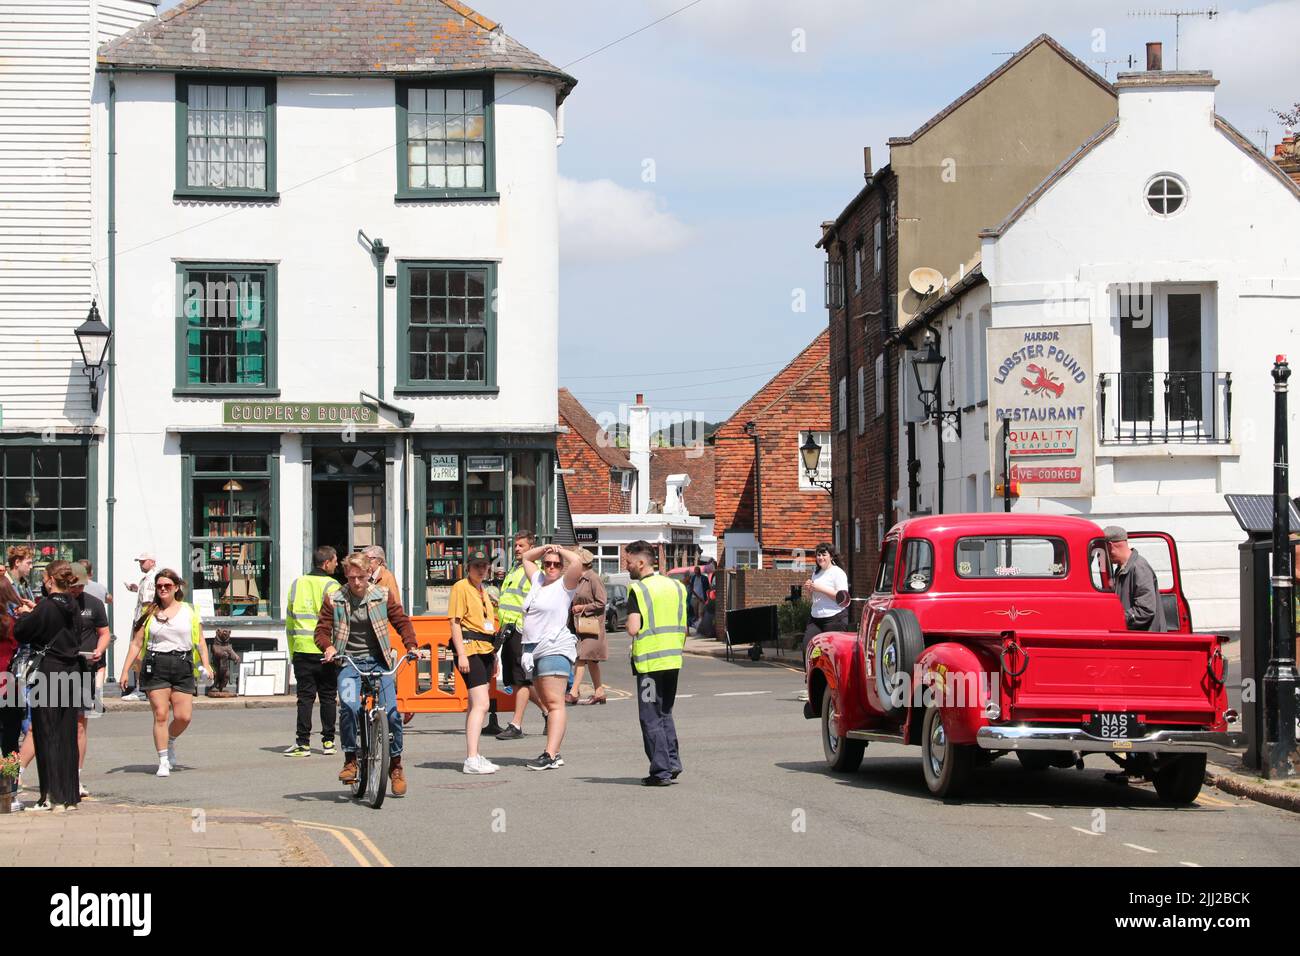 SET OF NETFLIX TV SHOW RED BOOK IN RYE UK PRETENDING TO BE MASSACHUSETTS PHOTOGRAPHED LAWFULLY FROM PUBLIC AREA WHERE PHOTOGRAPHY PERMITTED Stock Photo